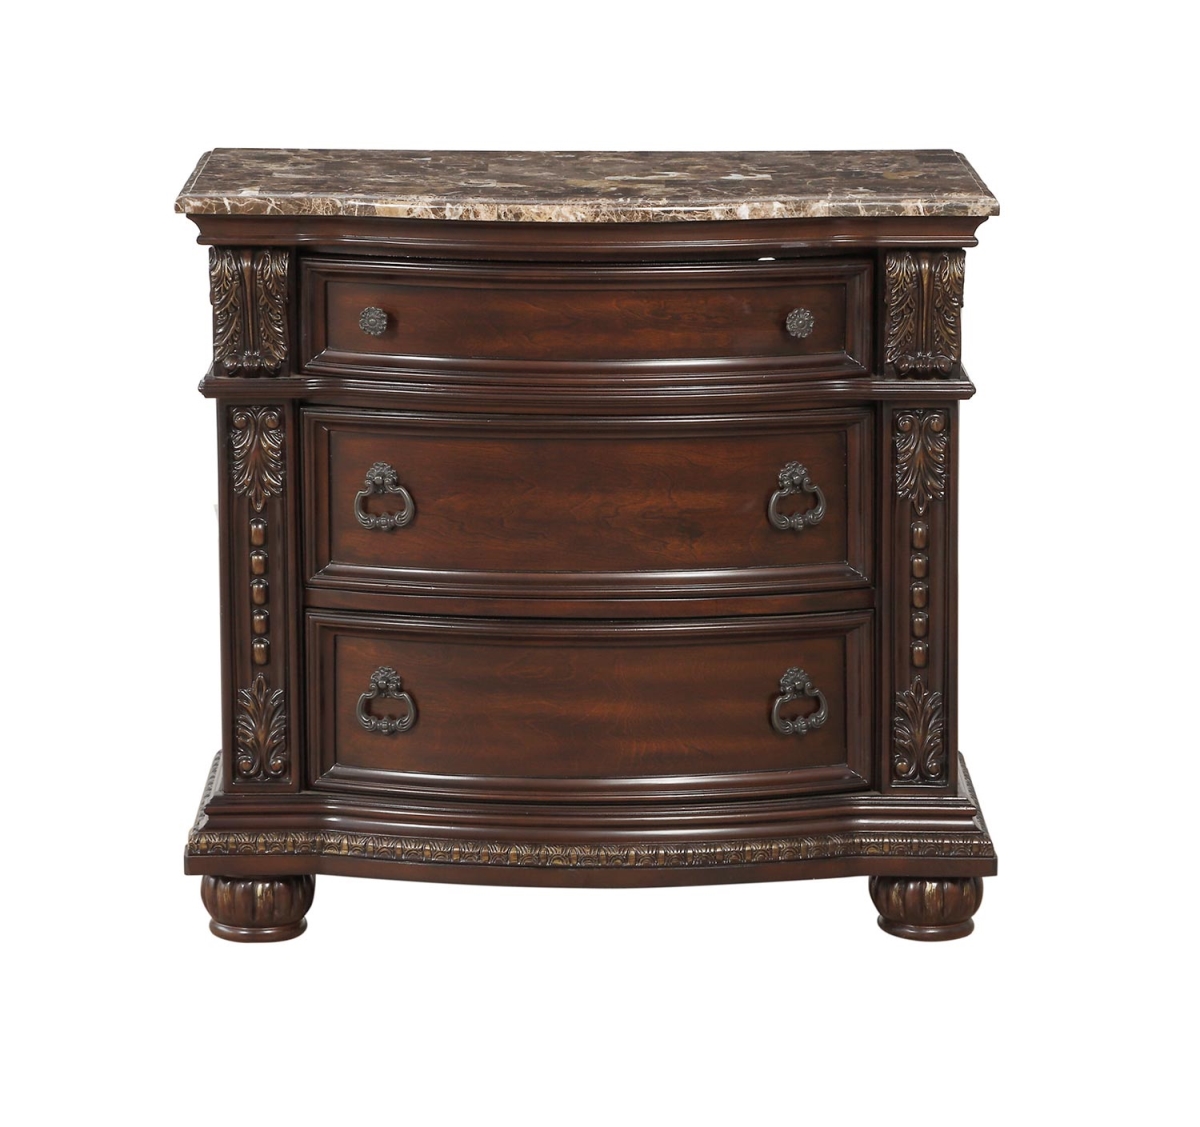 Home Elegance 1757-4 32 x 19.25 x 34.5 in. Cavalier Night Stand with Marble Top - Dark Cherry